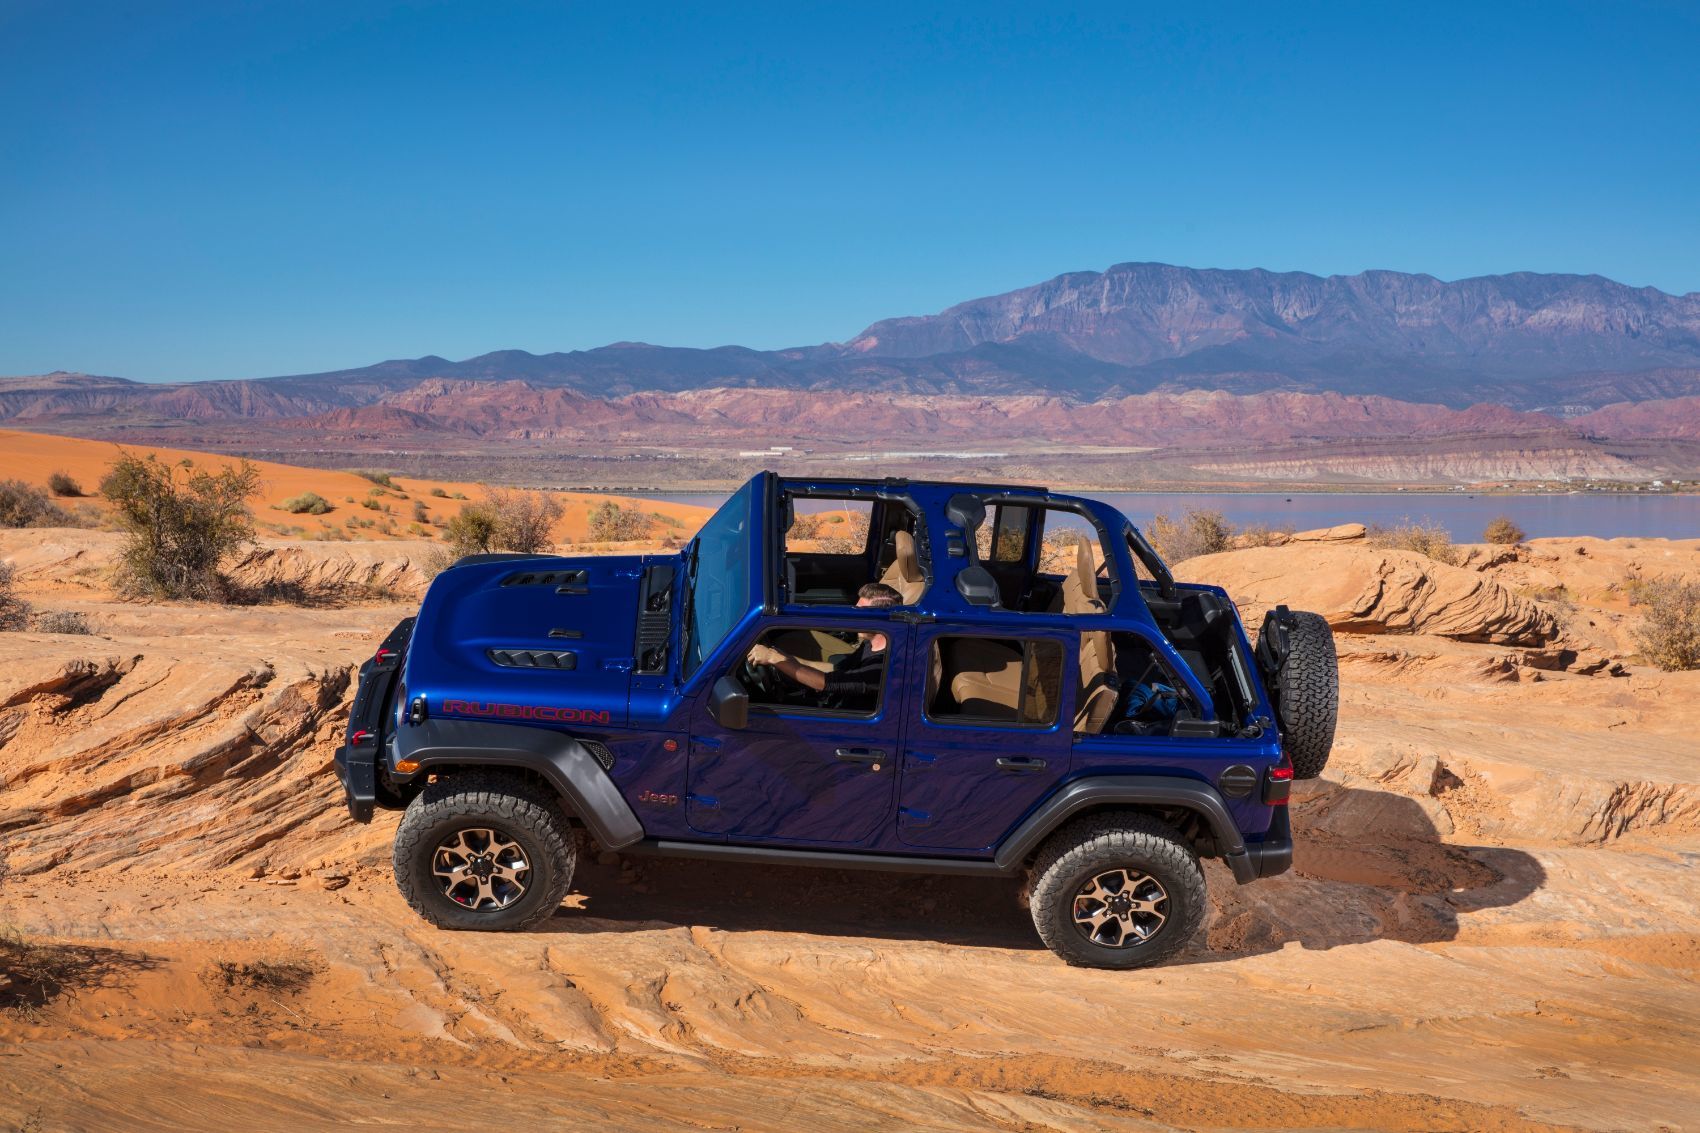 2020 Jeep Wrangler Unlimited Rubicon Review: The King of The Mountain